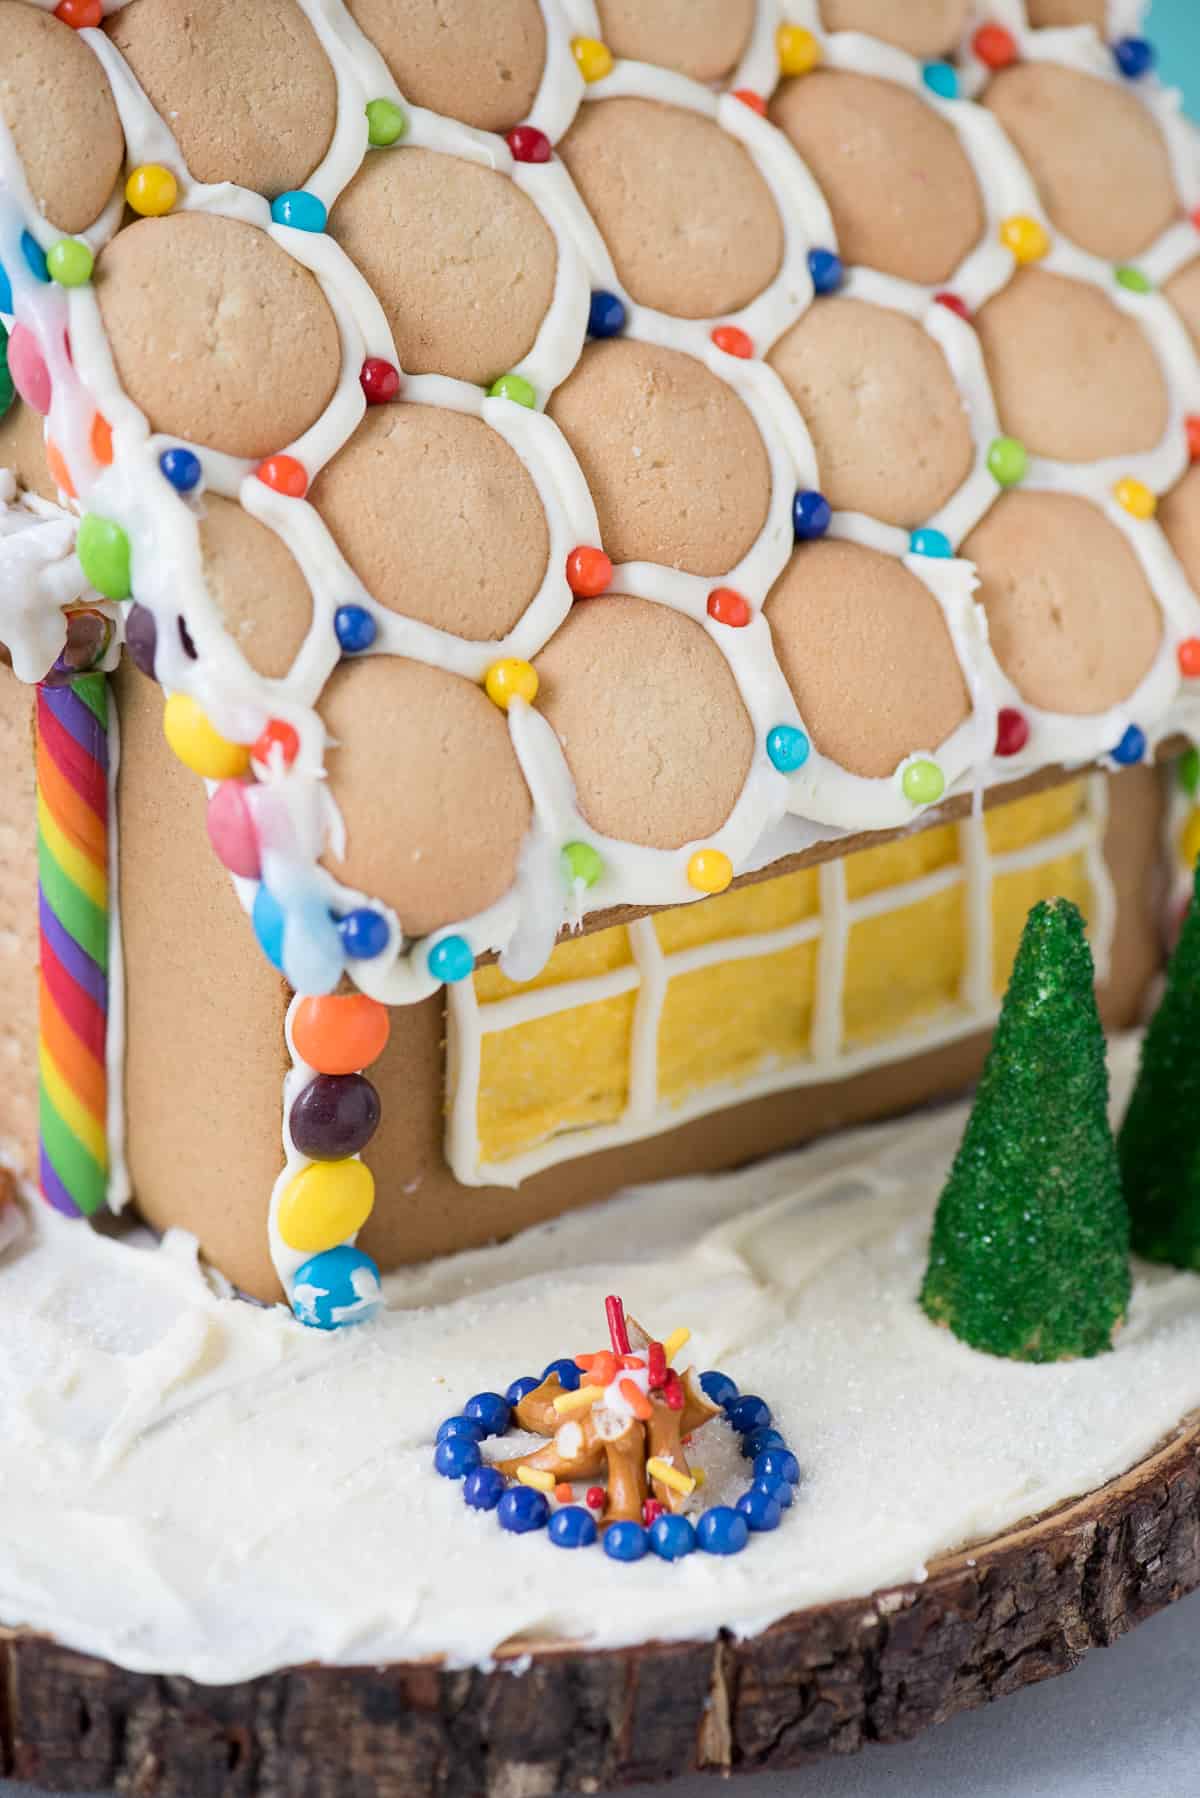 Get some inspiration for your holiday gingerbread house decorating with our gingerbread house tutorial and VIDEO! 